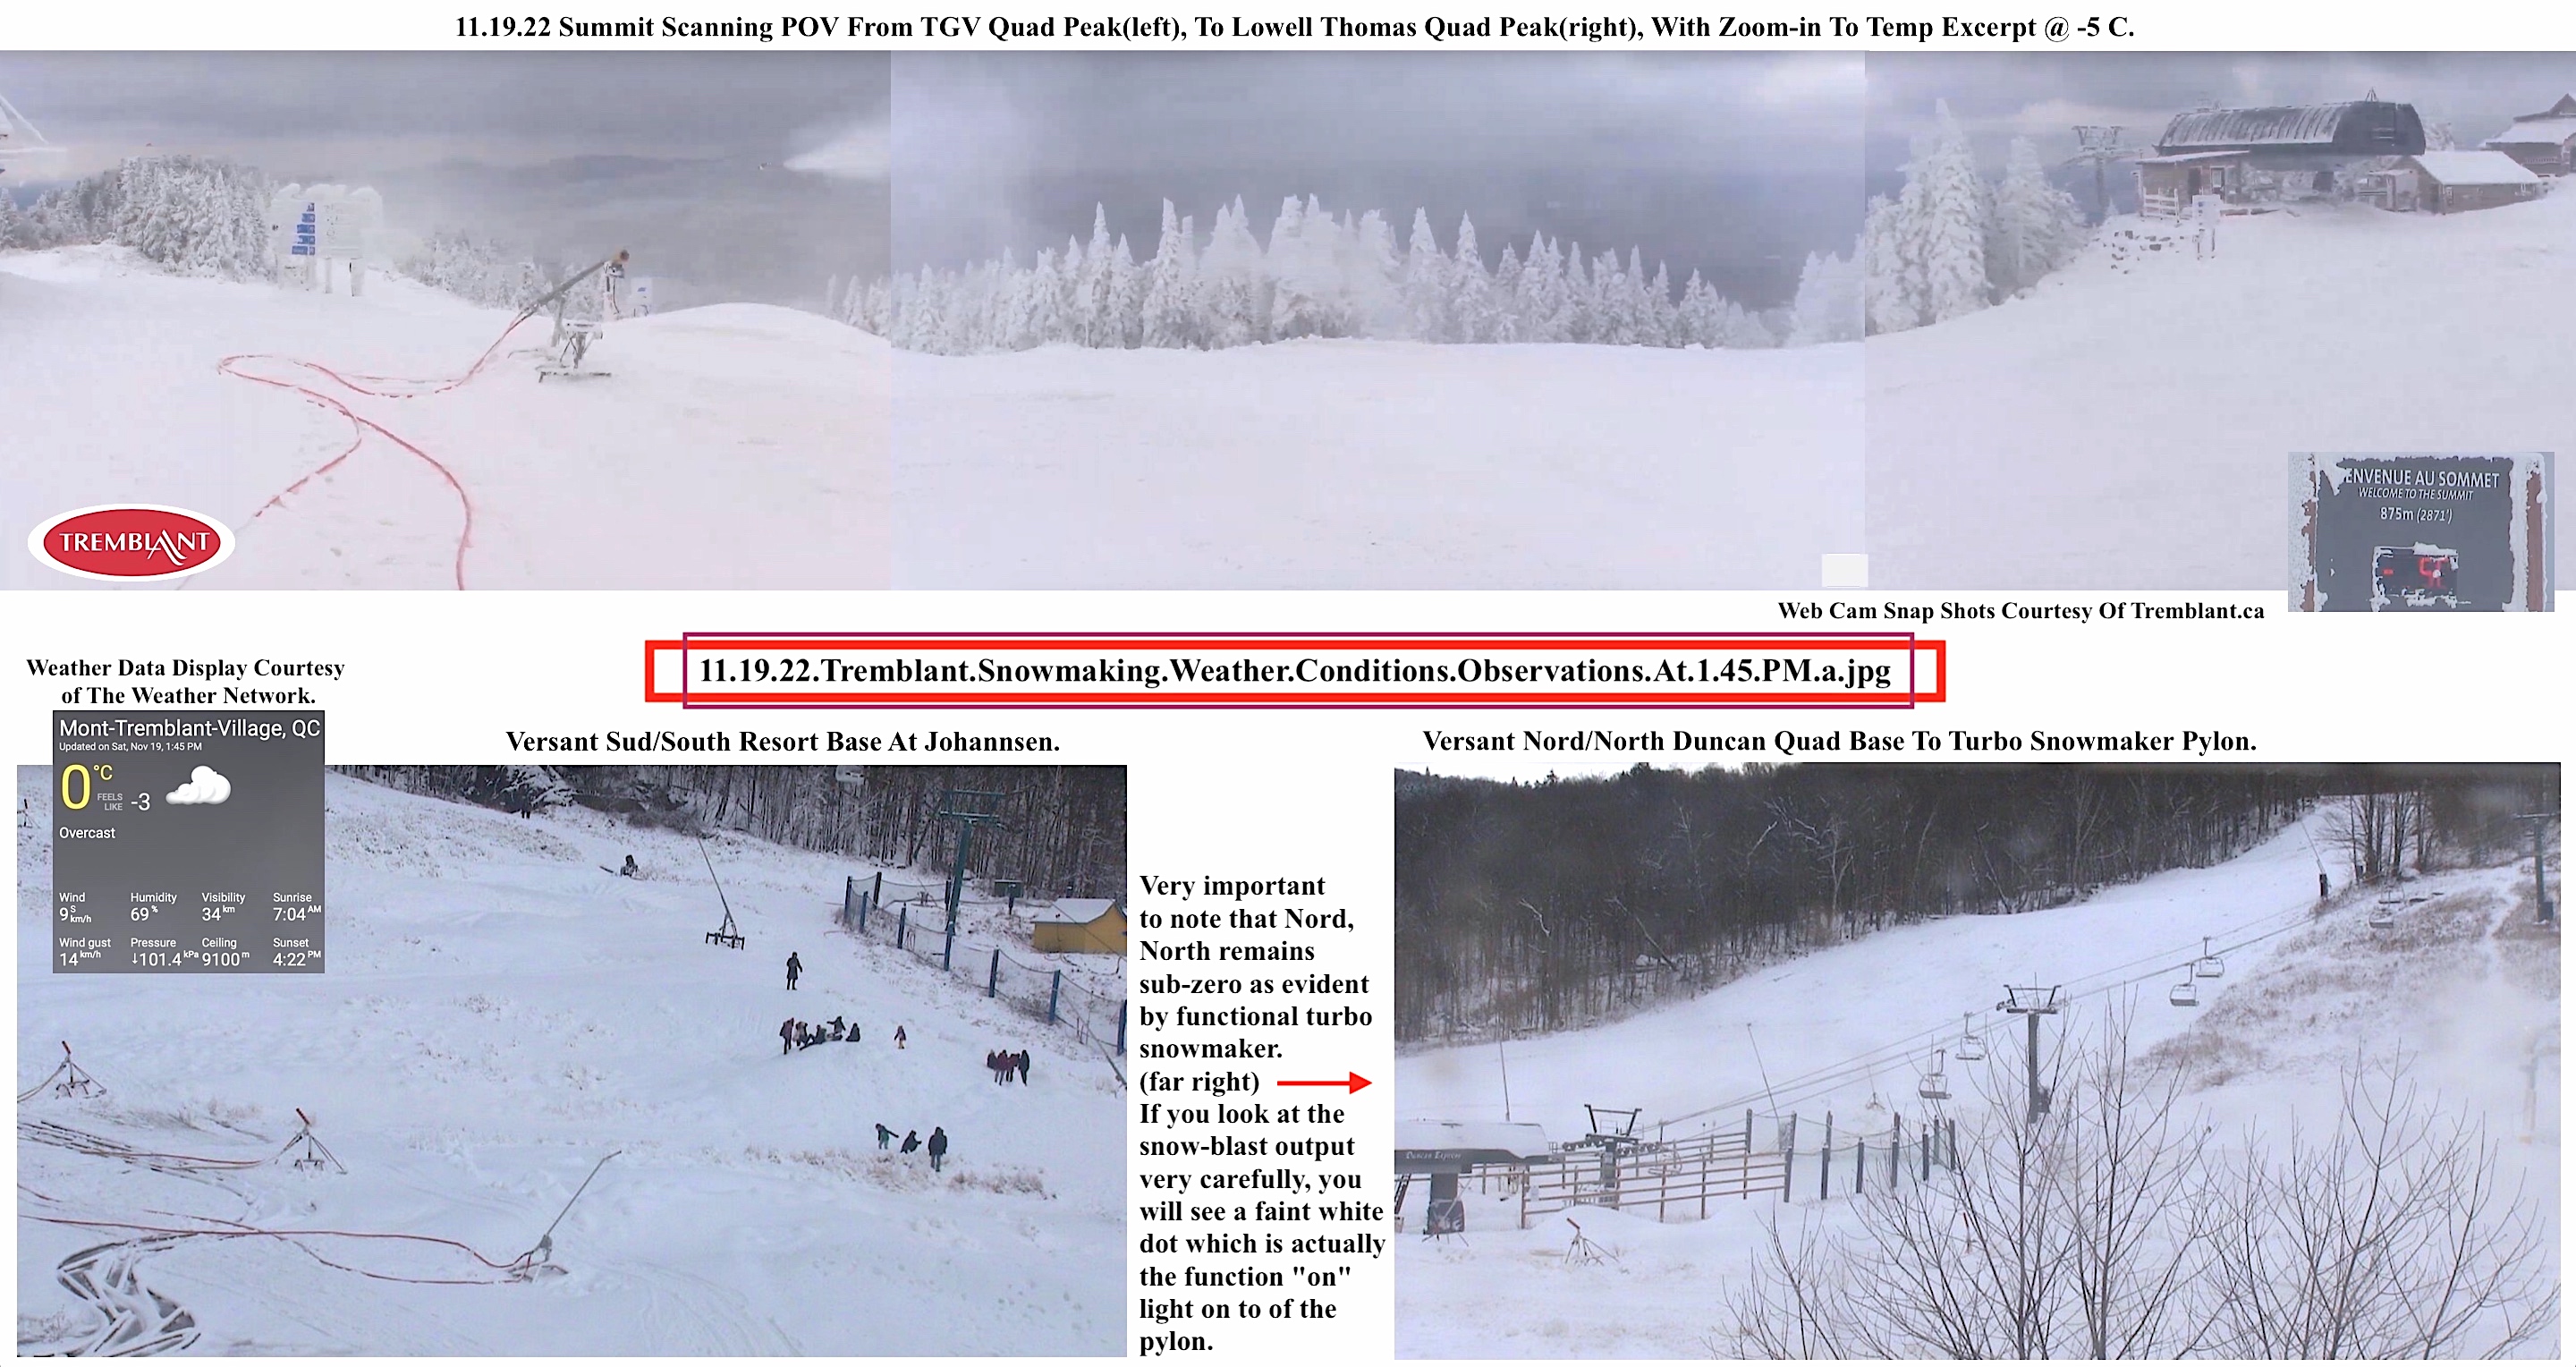 11.19.22.Tremblant.Snowmaking.Weather.Conditions.Observations.At.1.45.PM.a.jpg